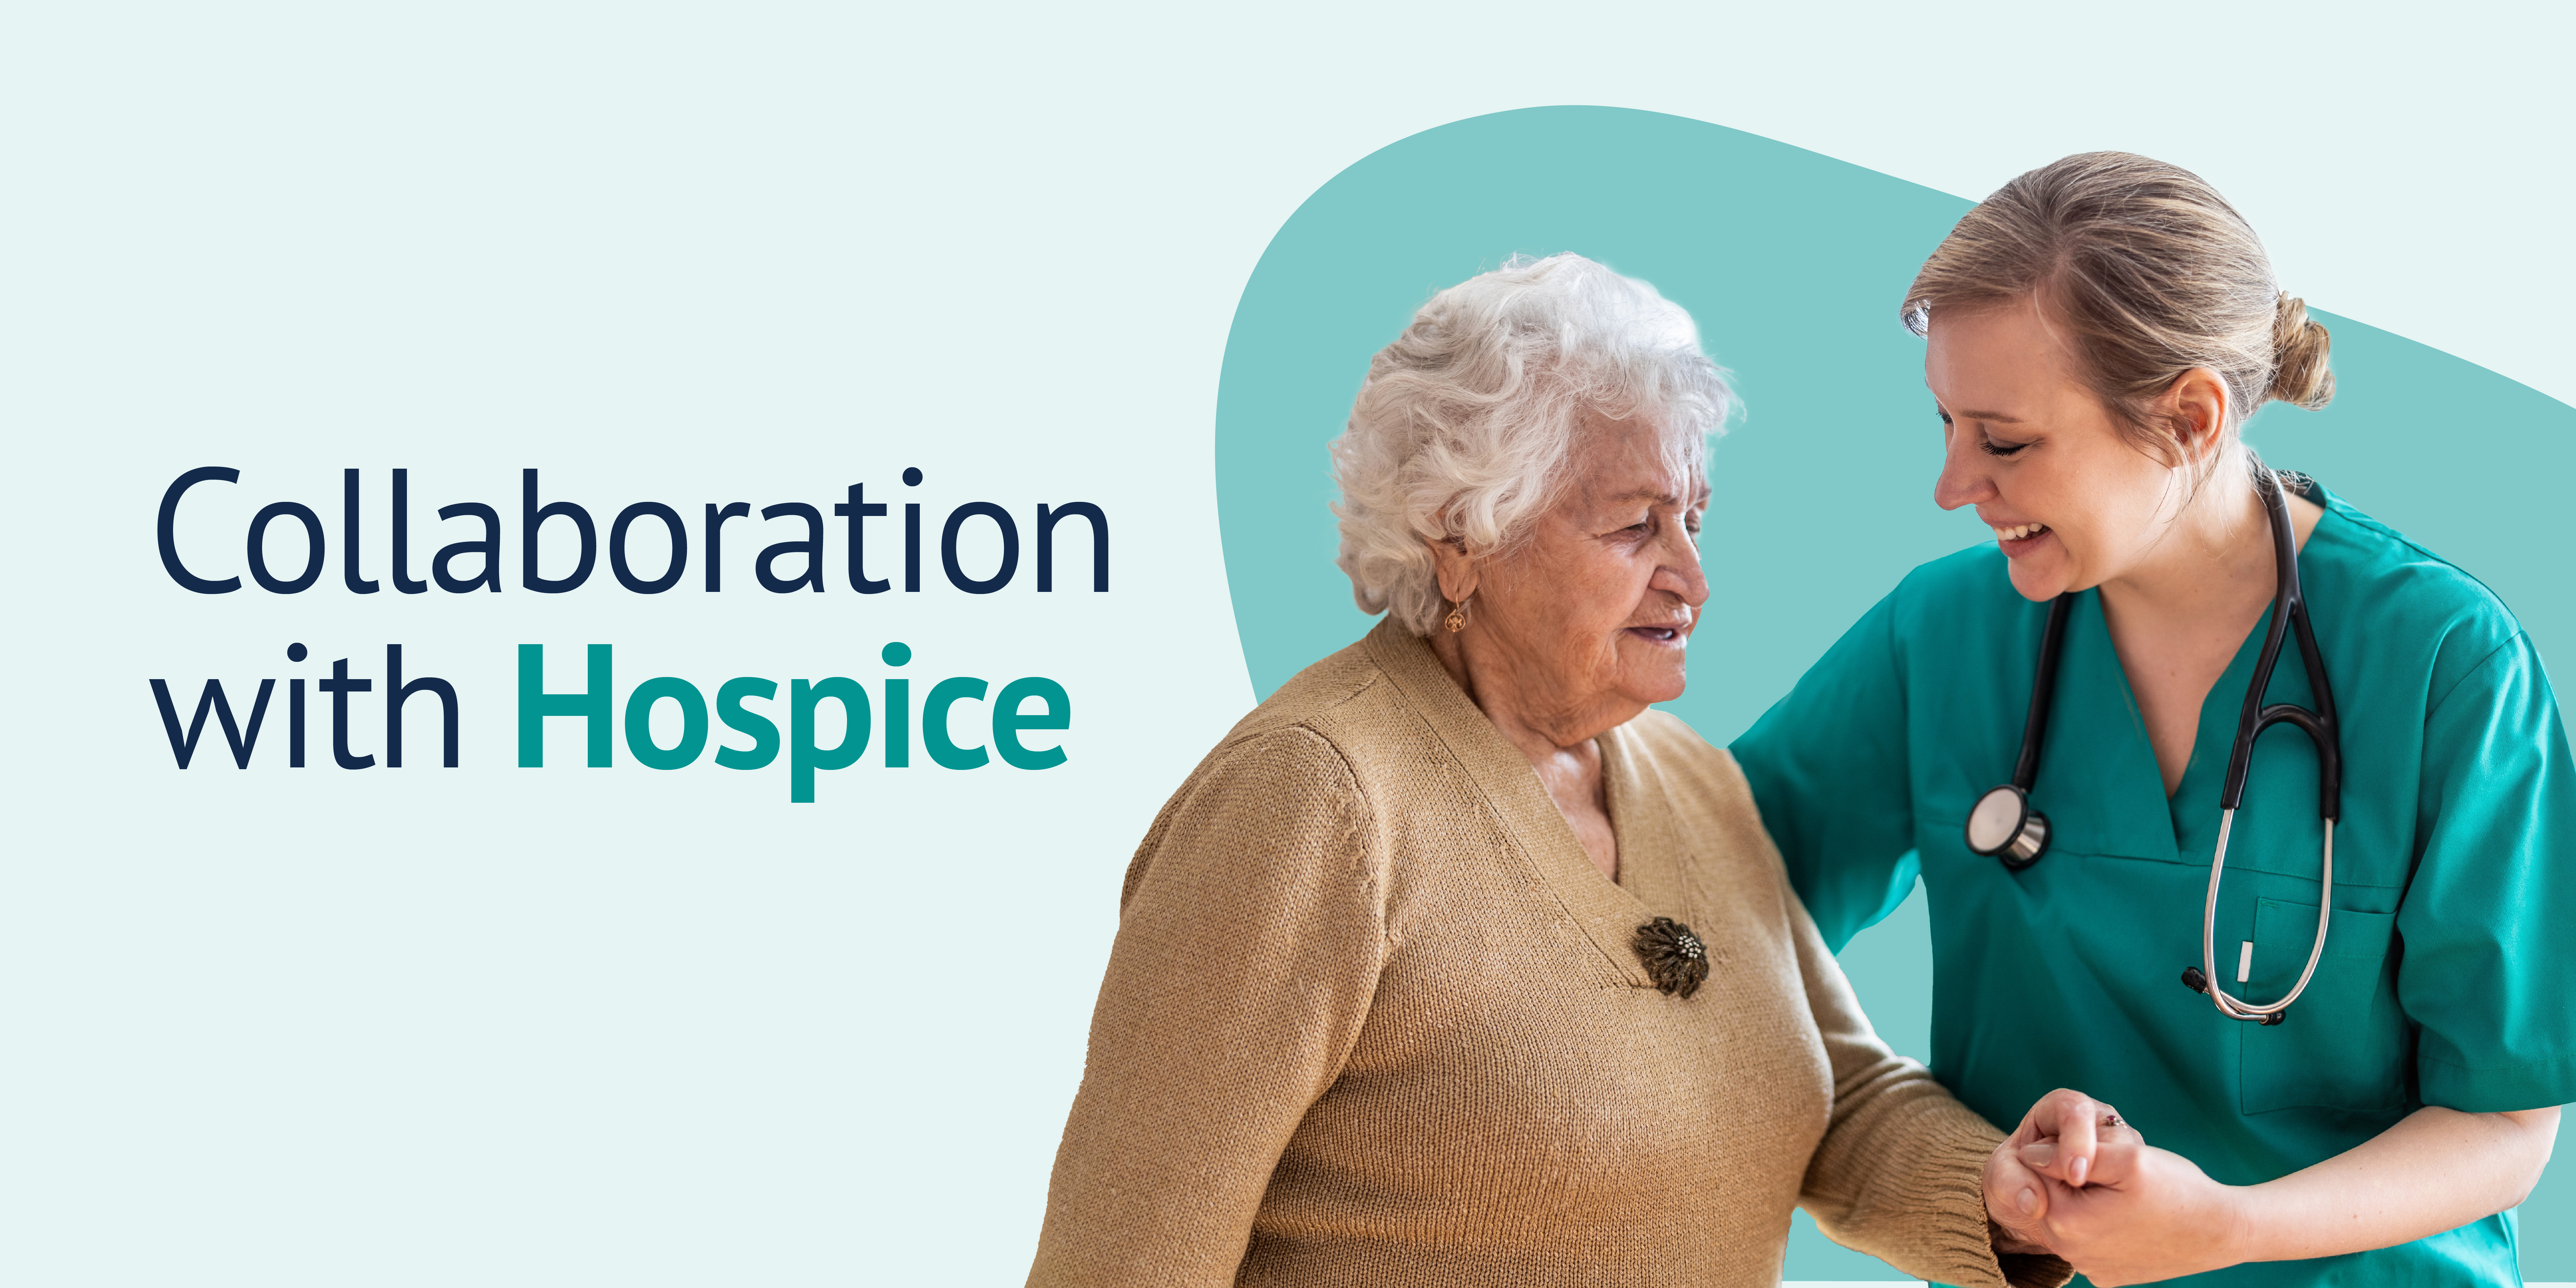 Reach More Families through Collaboration with Hospice